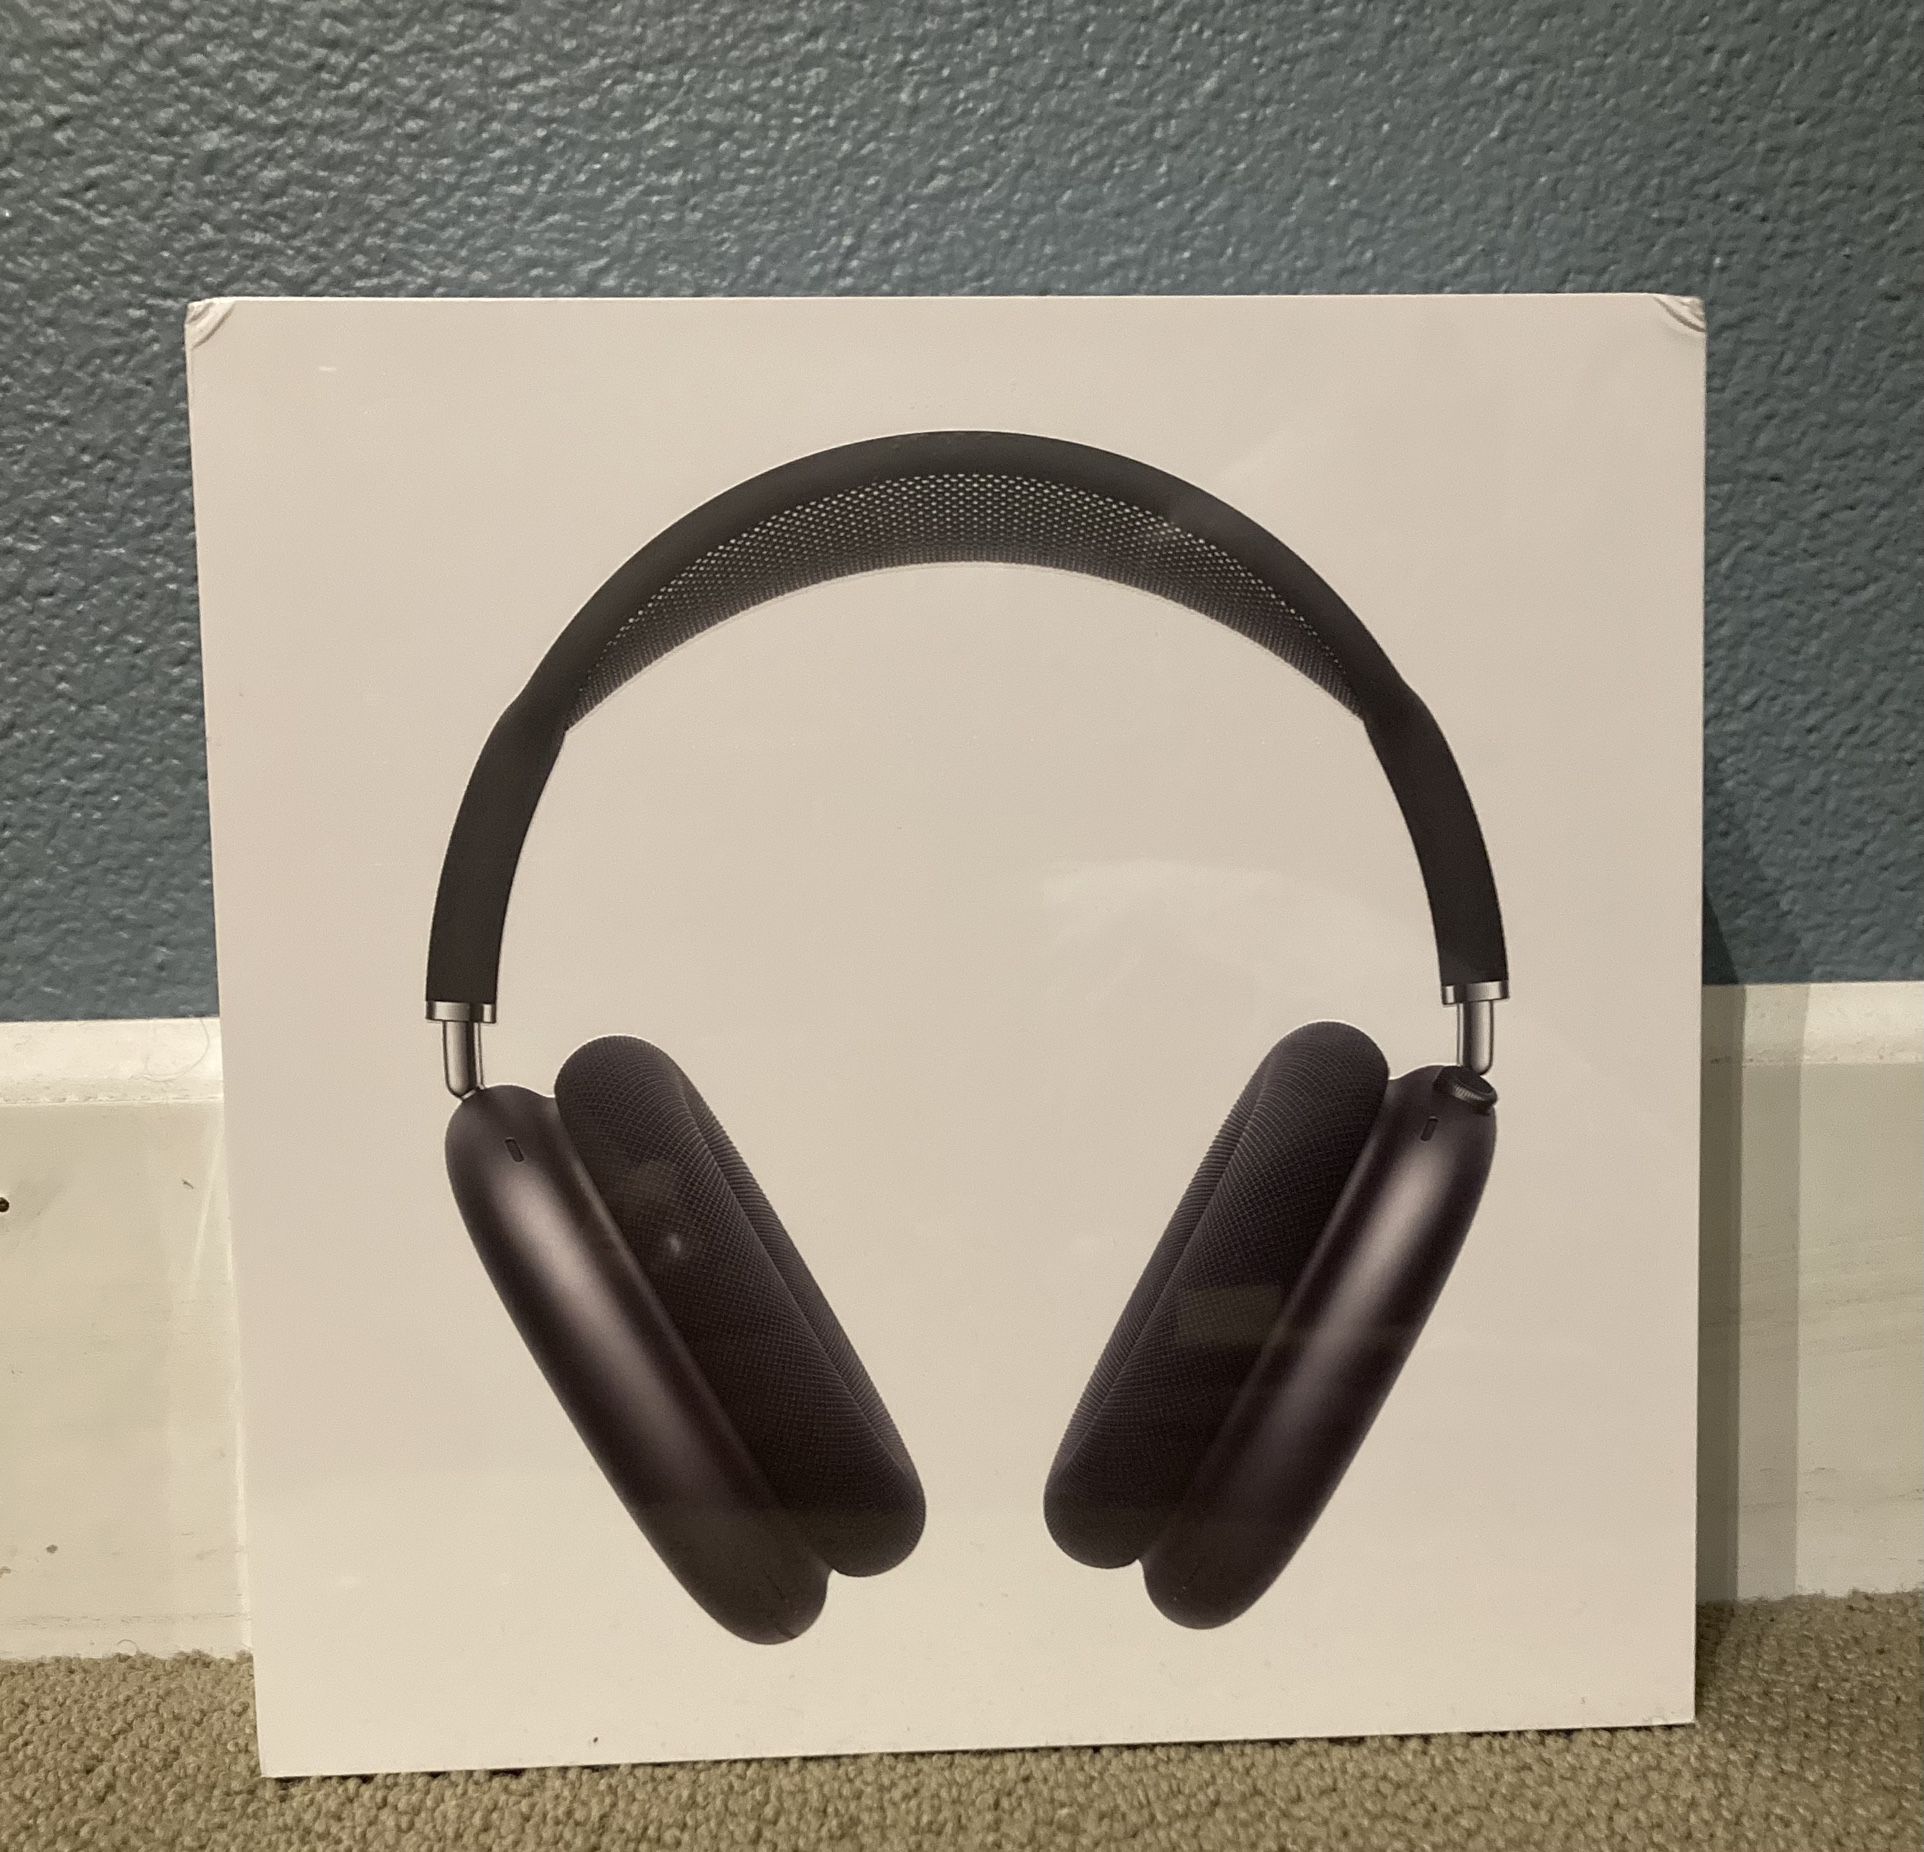 (LOOKING FOR BEST OFFER) Brand New Apple Pro Max Headphones